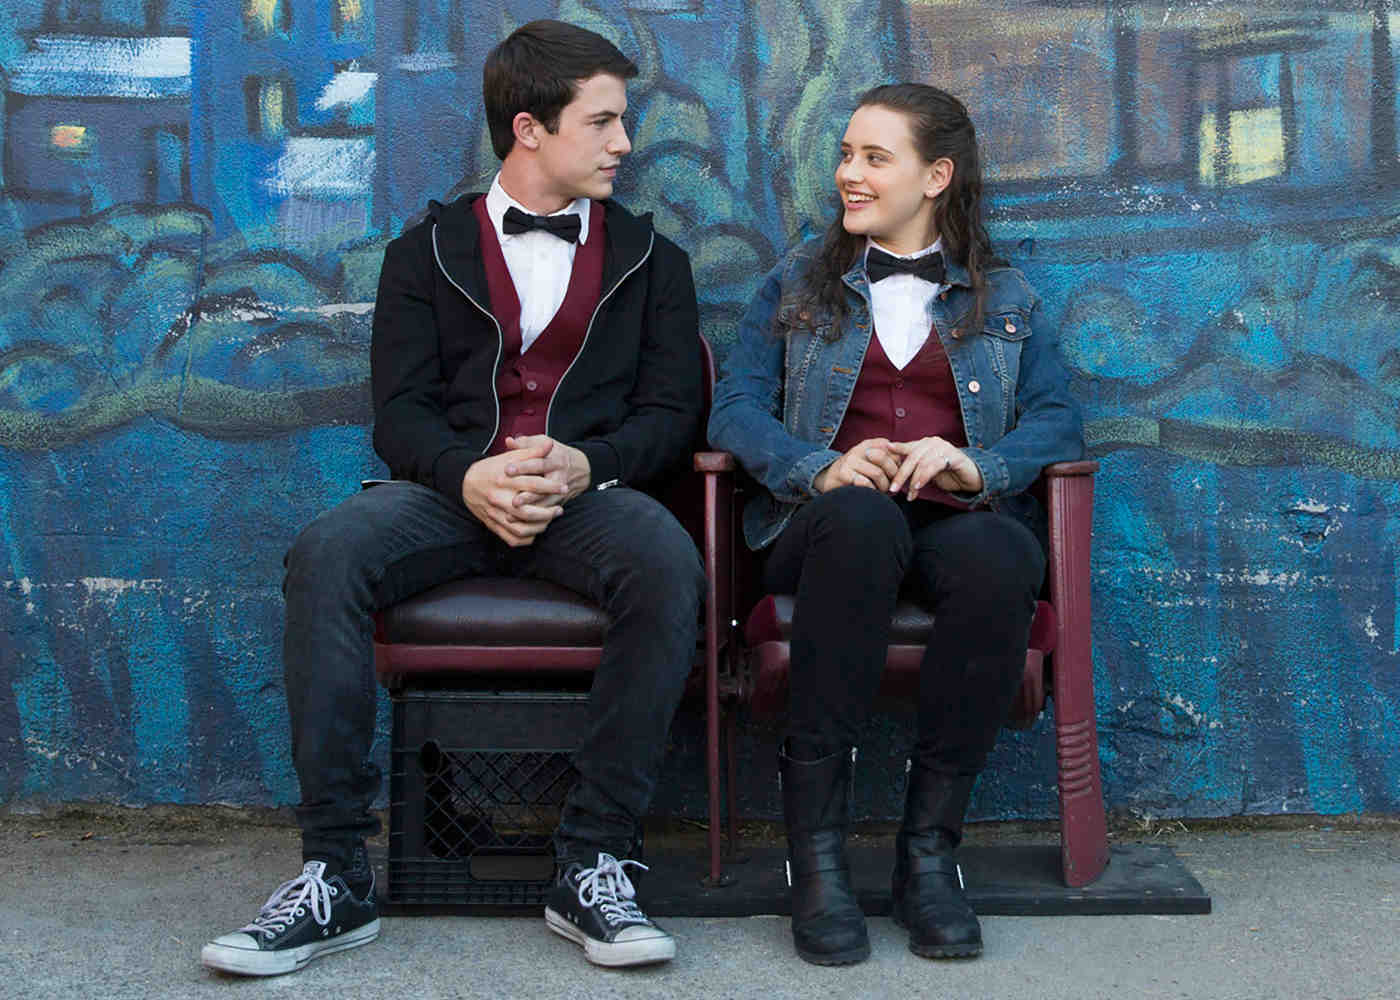 More Tapes to Come? 13 Reasons Why is Nearing Season 2 Renewal